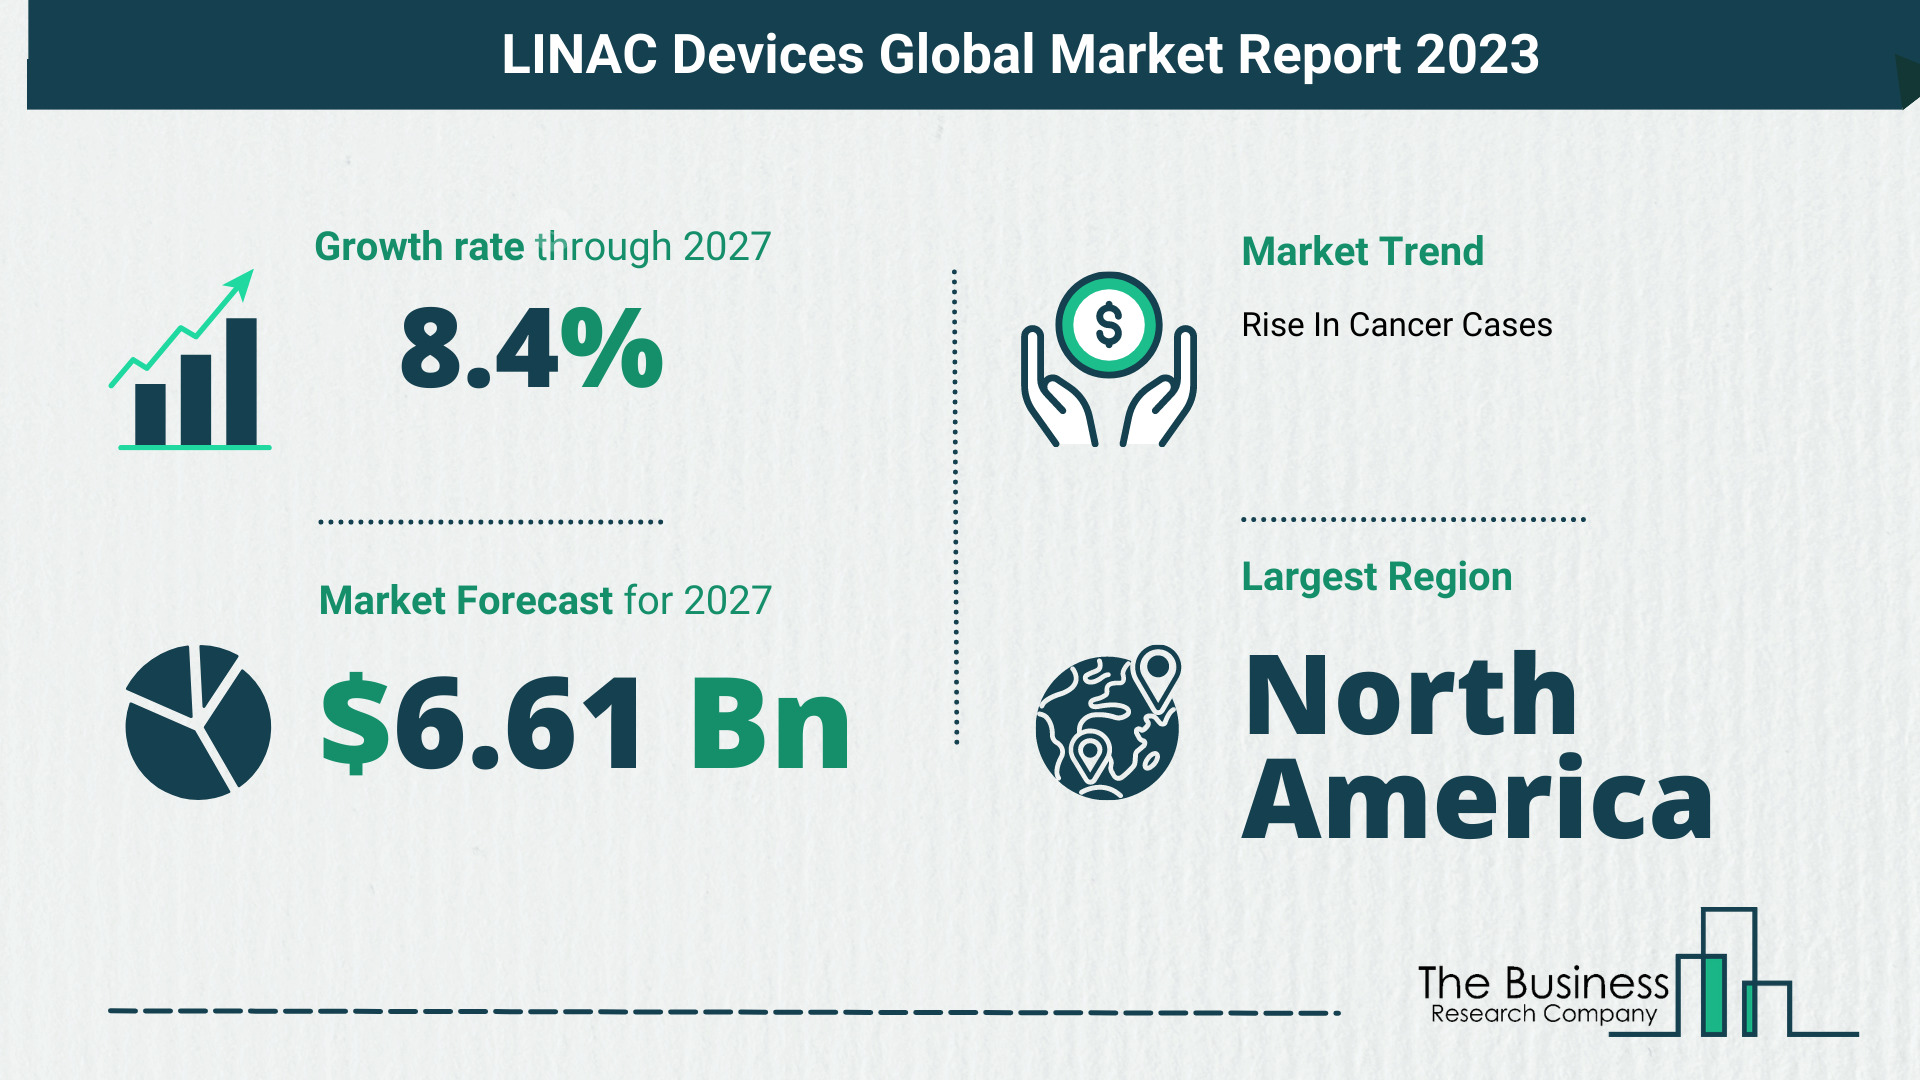 What Will The LINAC Devices Market Look Like In 2023?